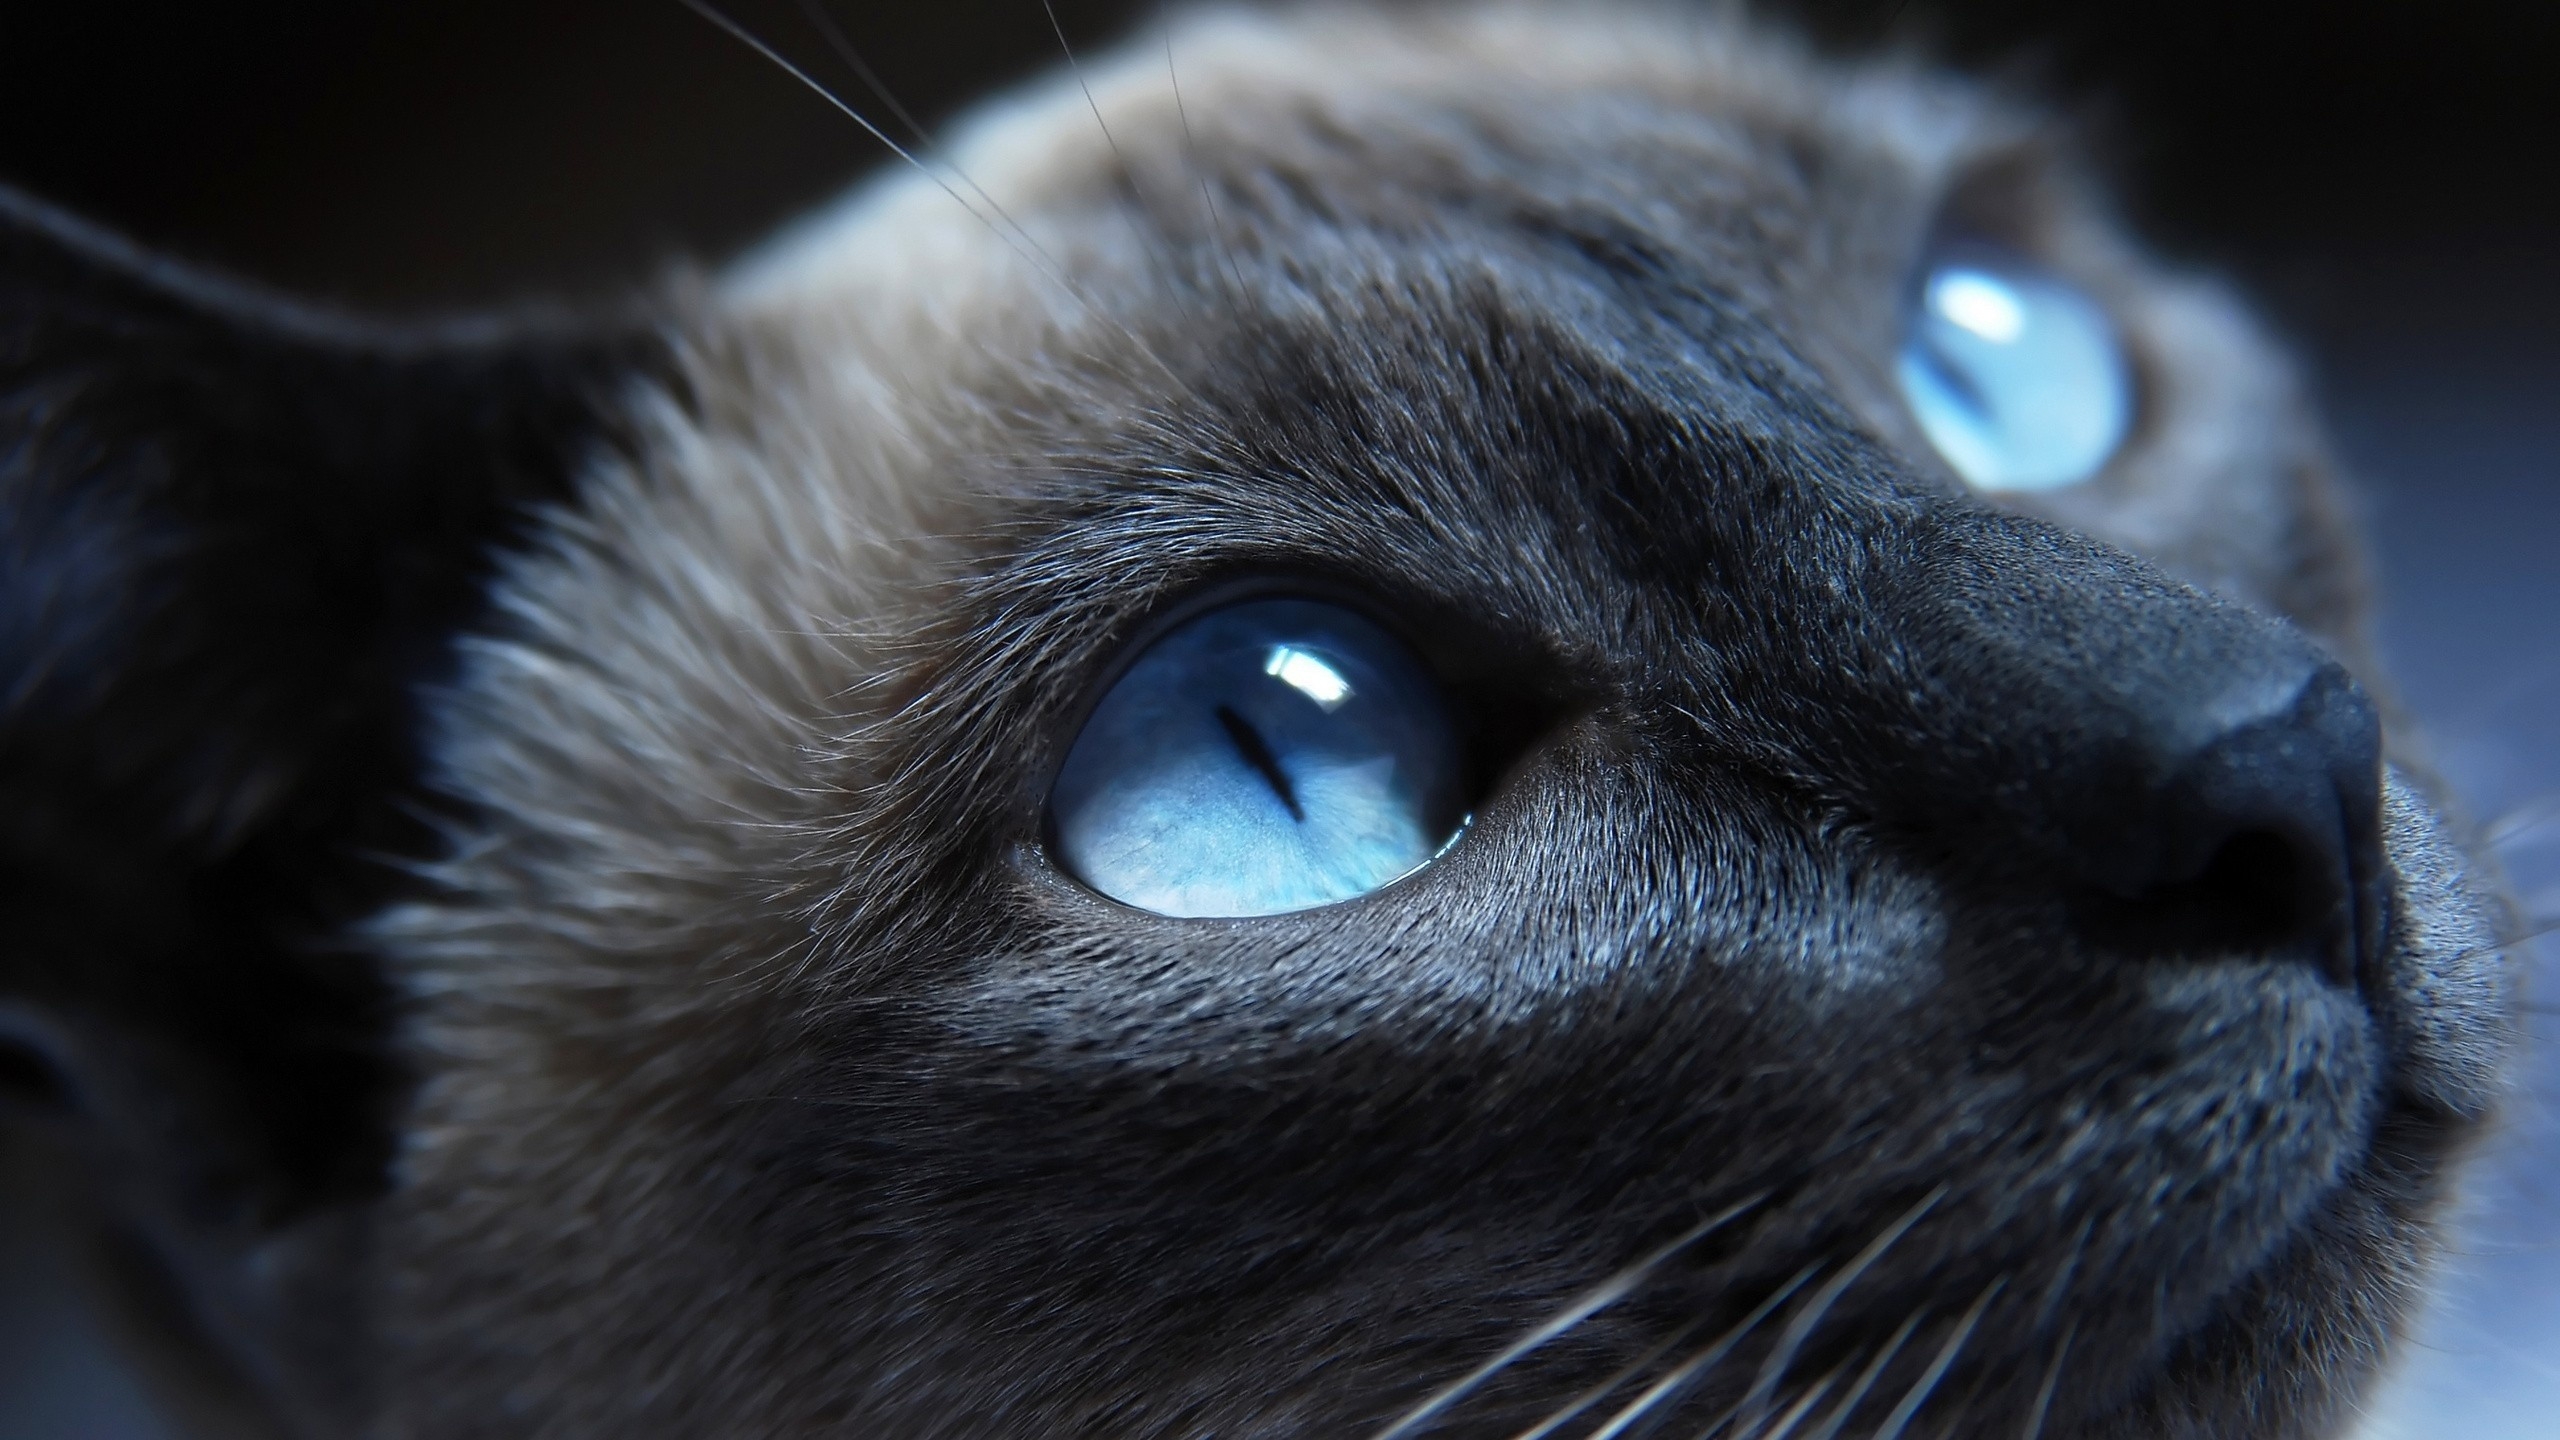 Download Wallpaper, Download 2560x1440 cats blue eyes